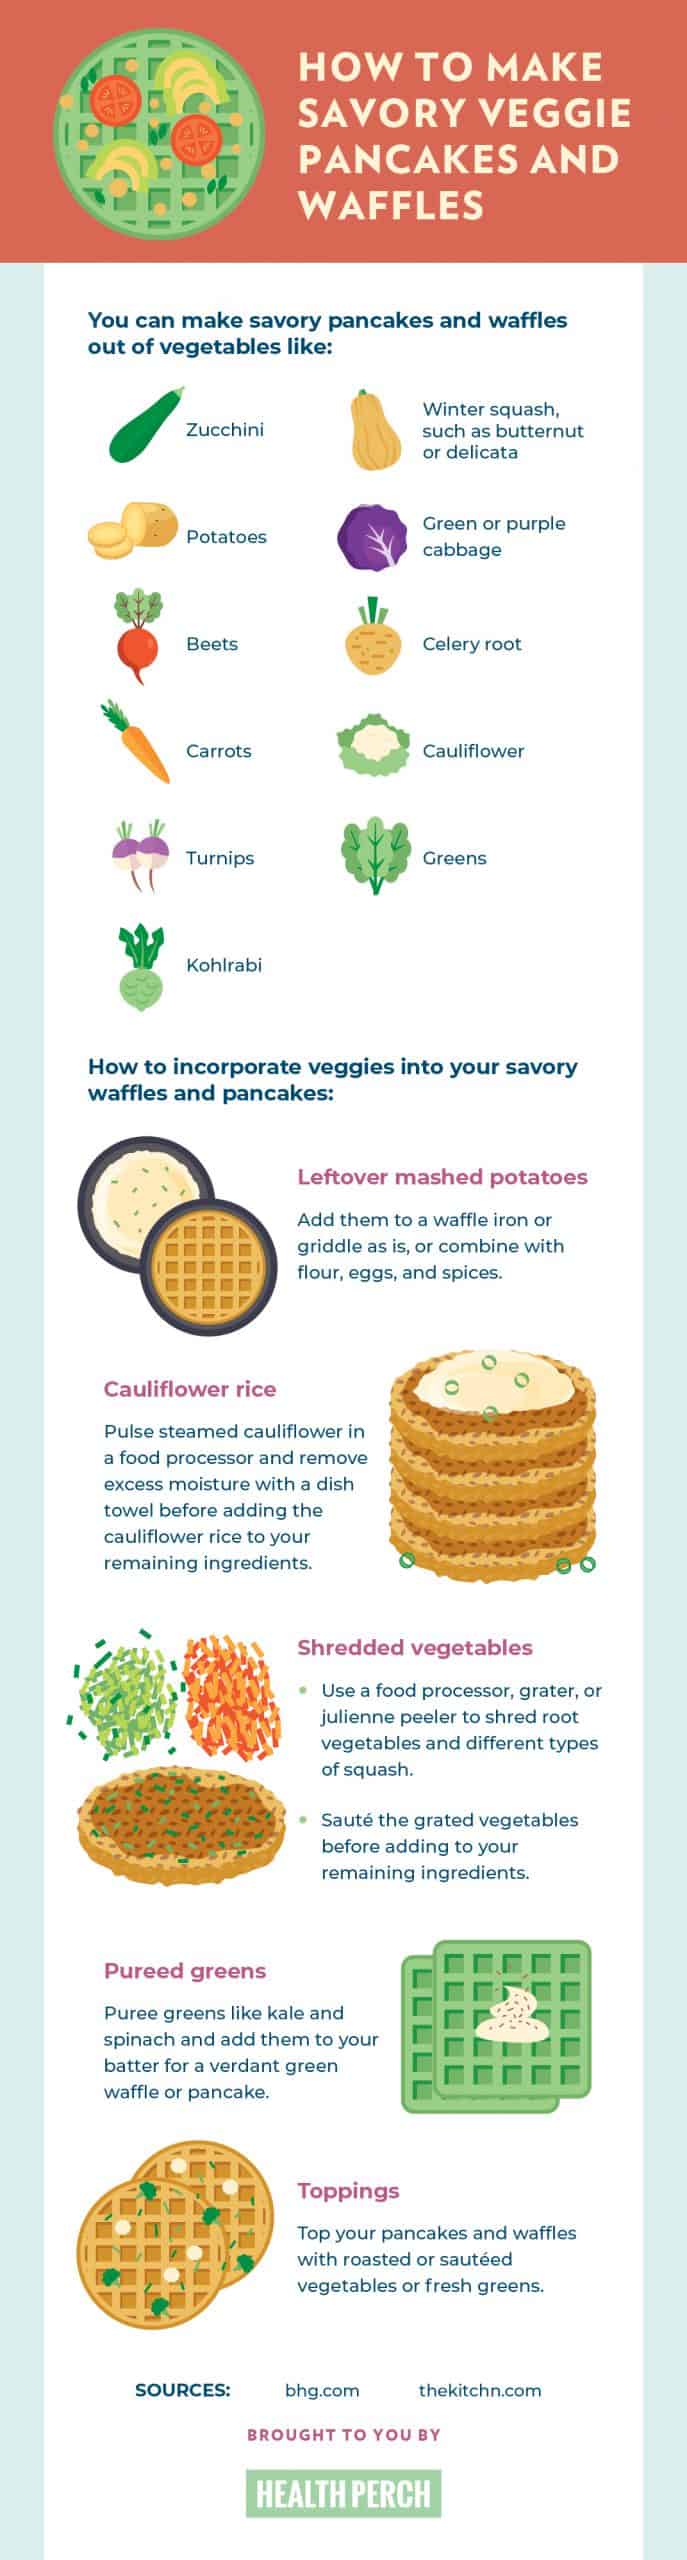 Try These 8 Healthy, Savory Waffles and Pancakes for Breakfast, Lunch, or Dinner